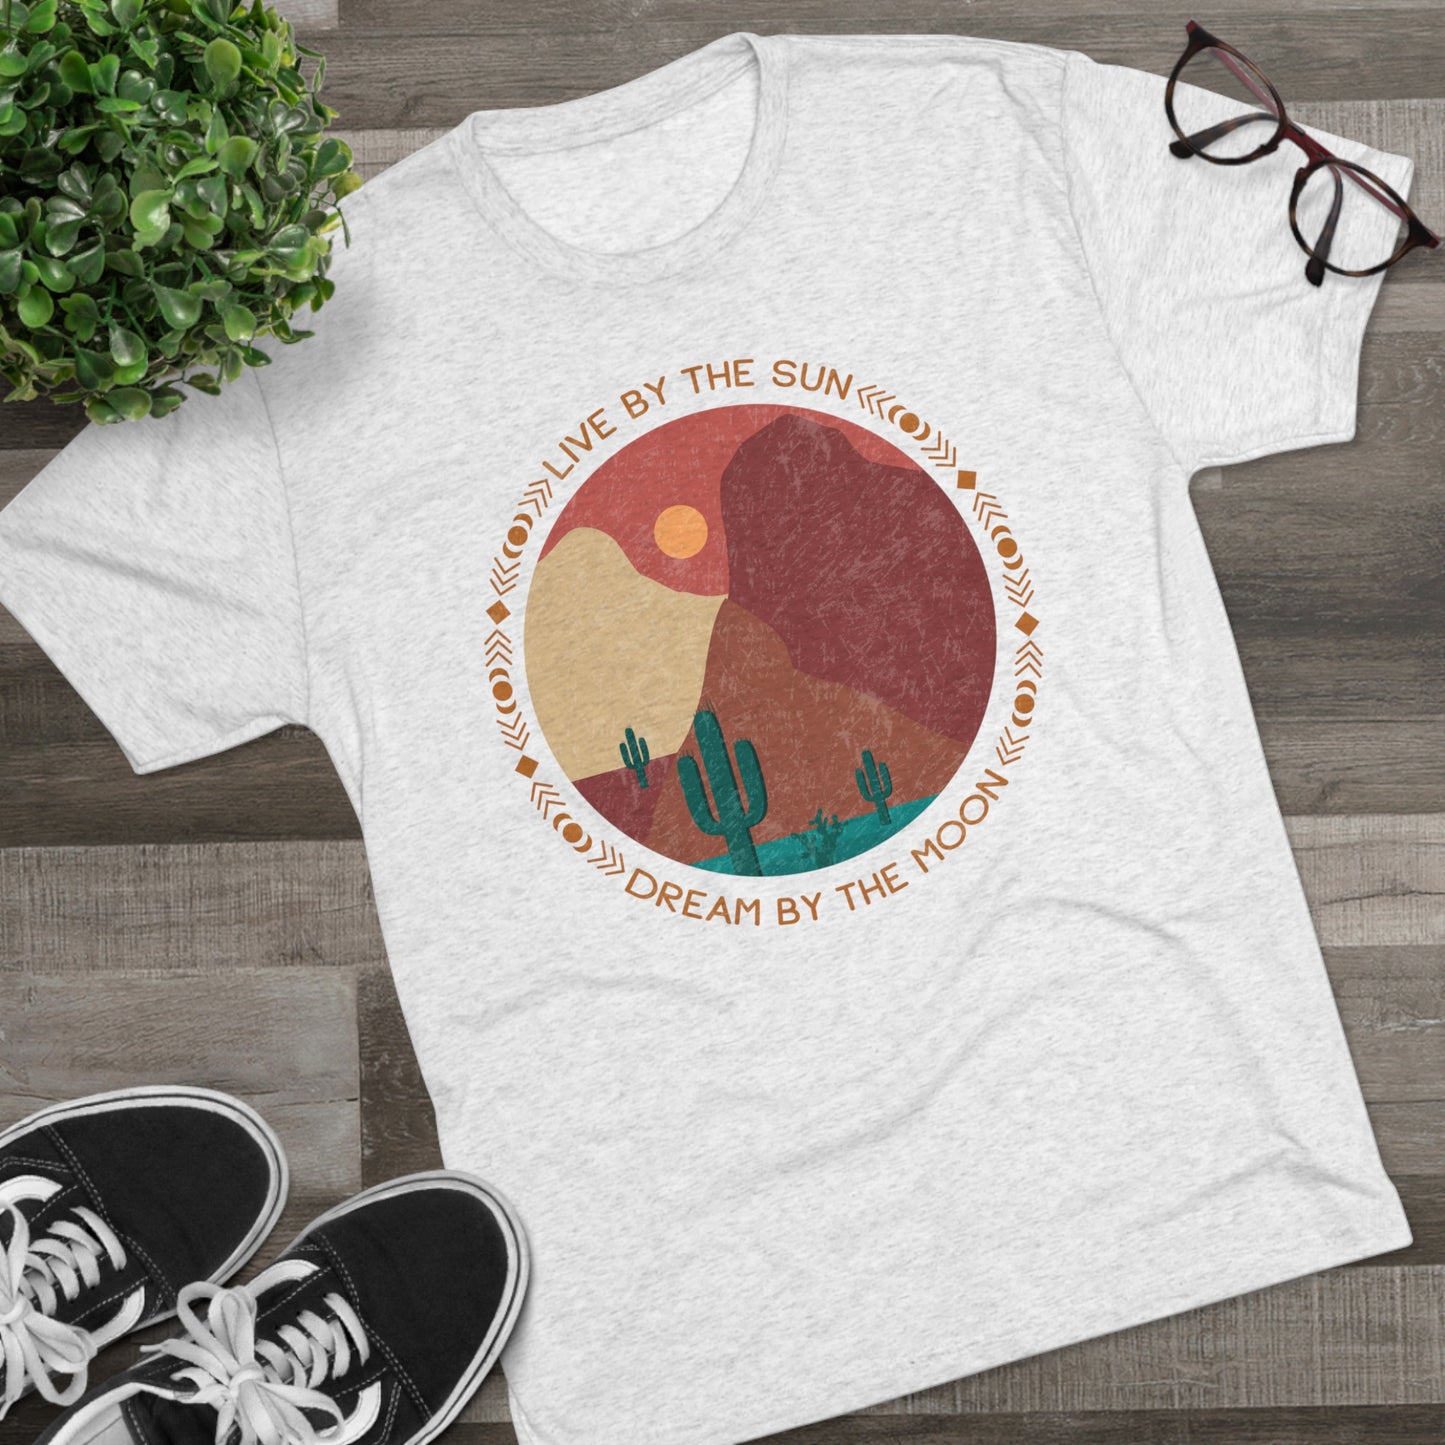 Live by the Sun Dream by the Moon Desert Tri-Blend Crew Tee